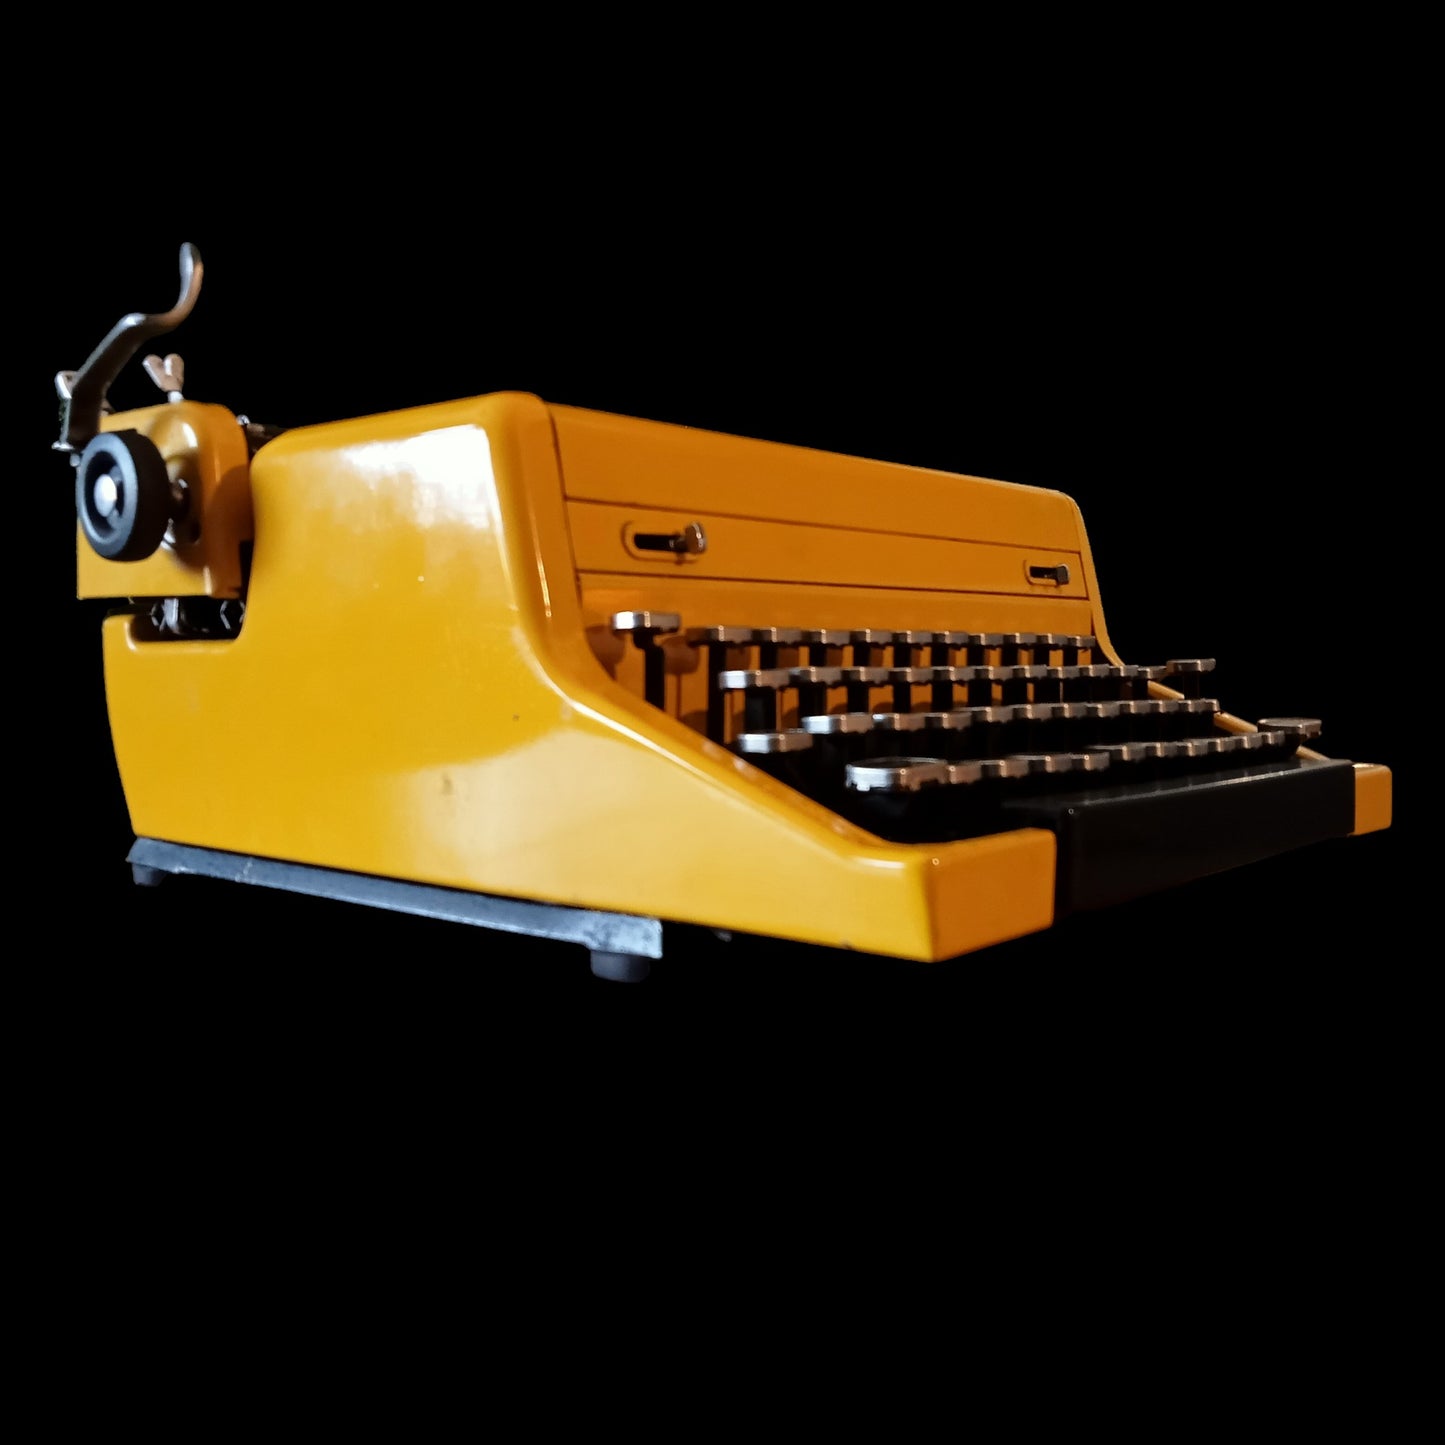 Image of Royal Vintage Typewriter. Available from universaltypewritercompany.in